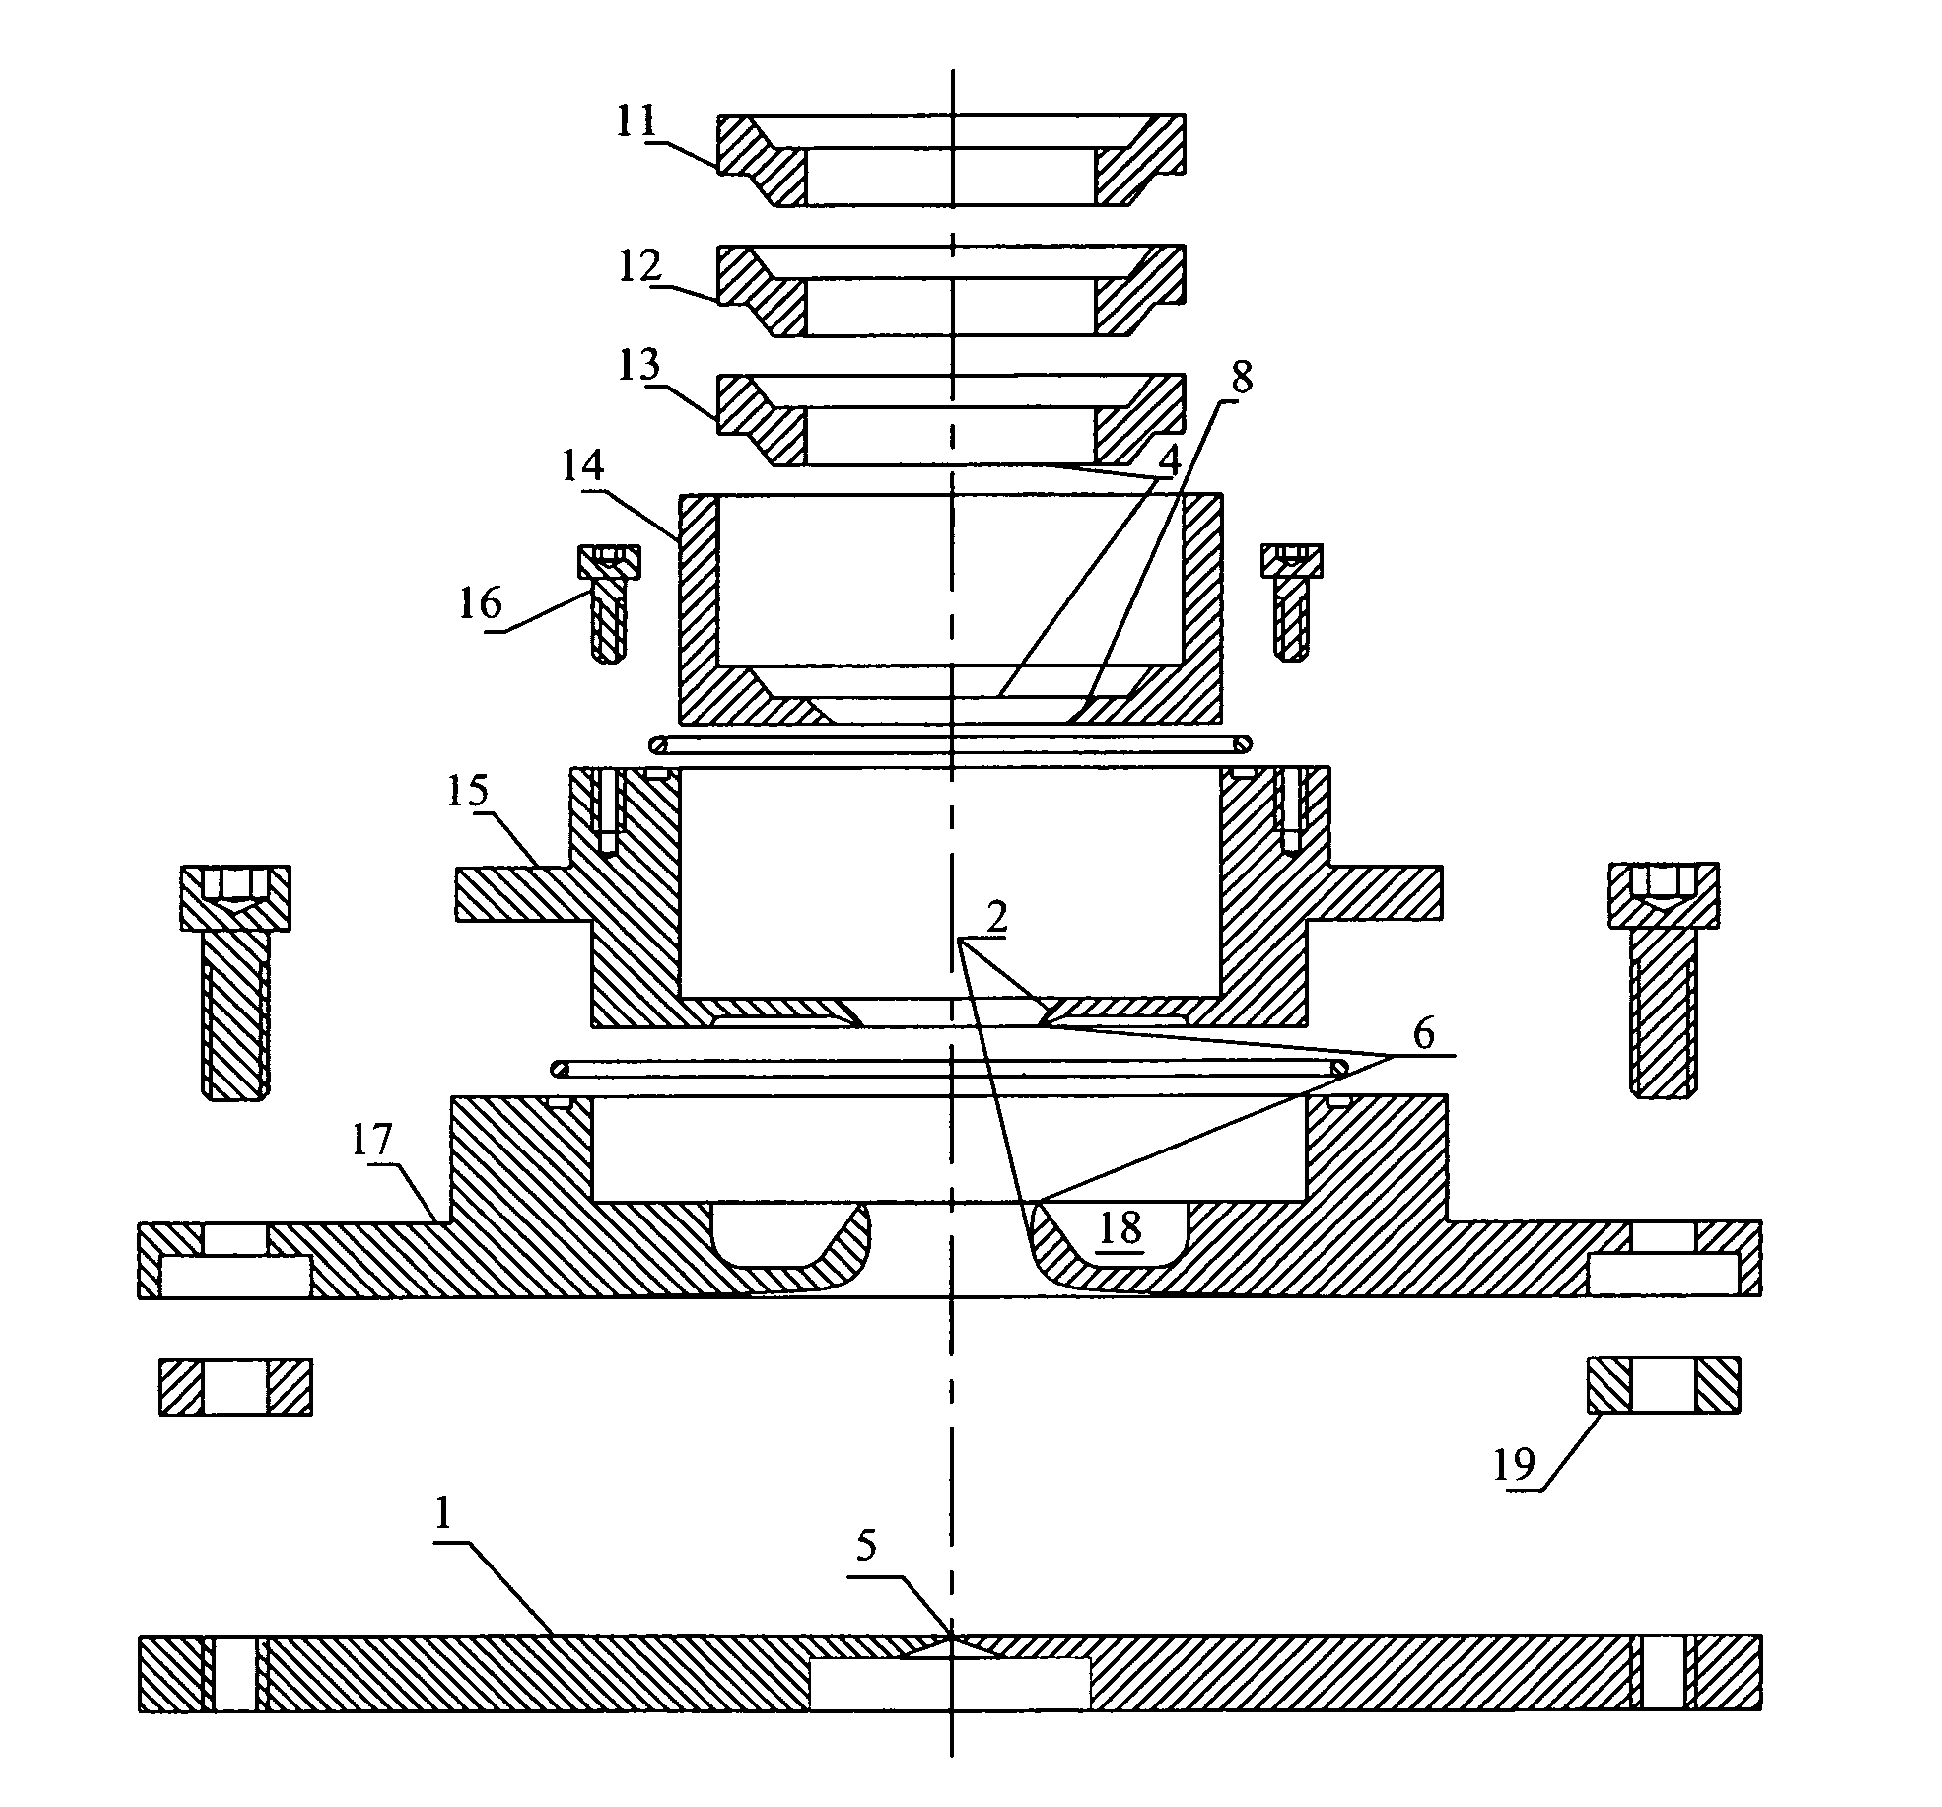 Coupling between axisymmetric differential mobility analyzers and mass spectrometers or other analyzers and detectors